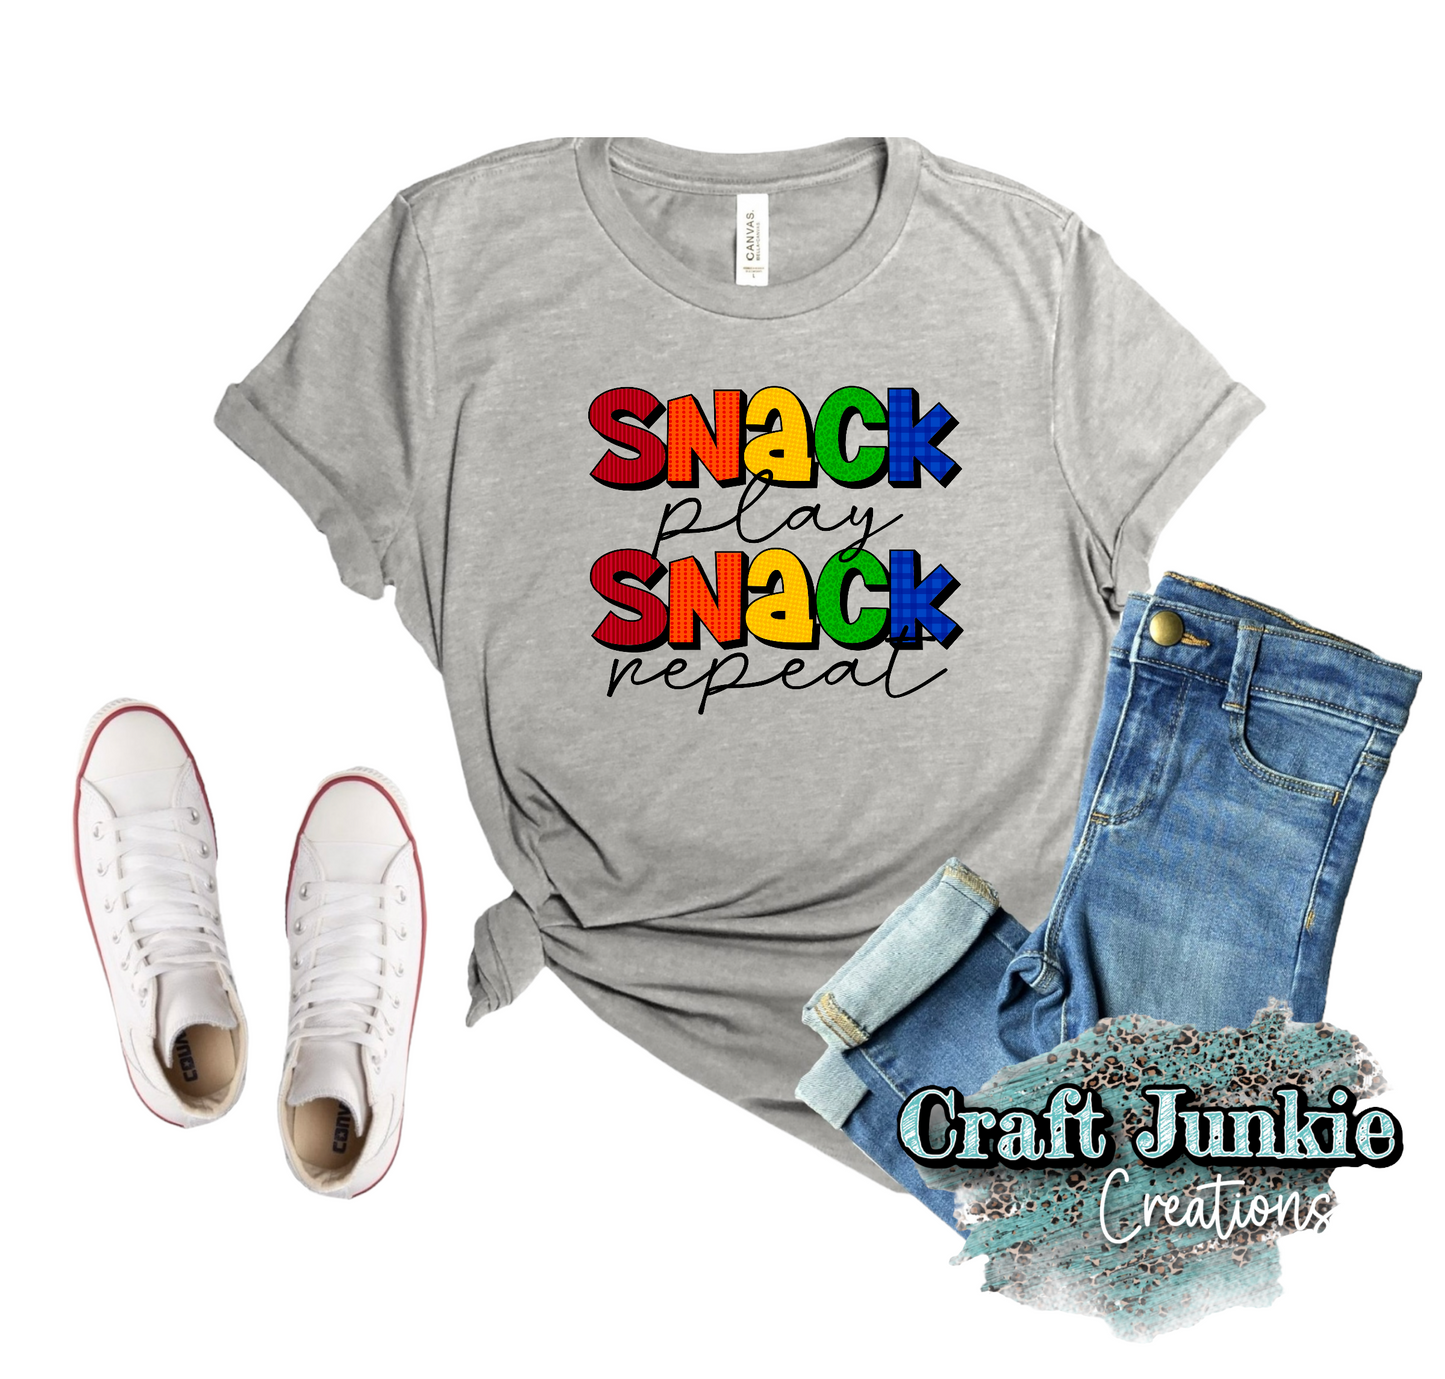 Snack Play Snack Repeat Tshirt